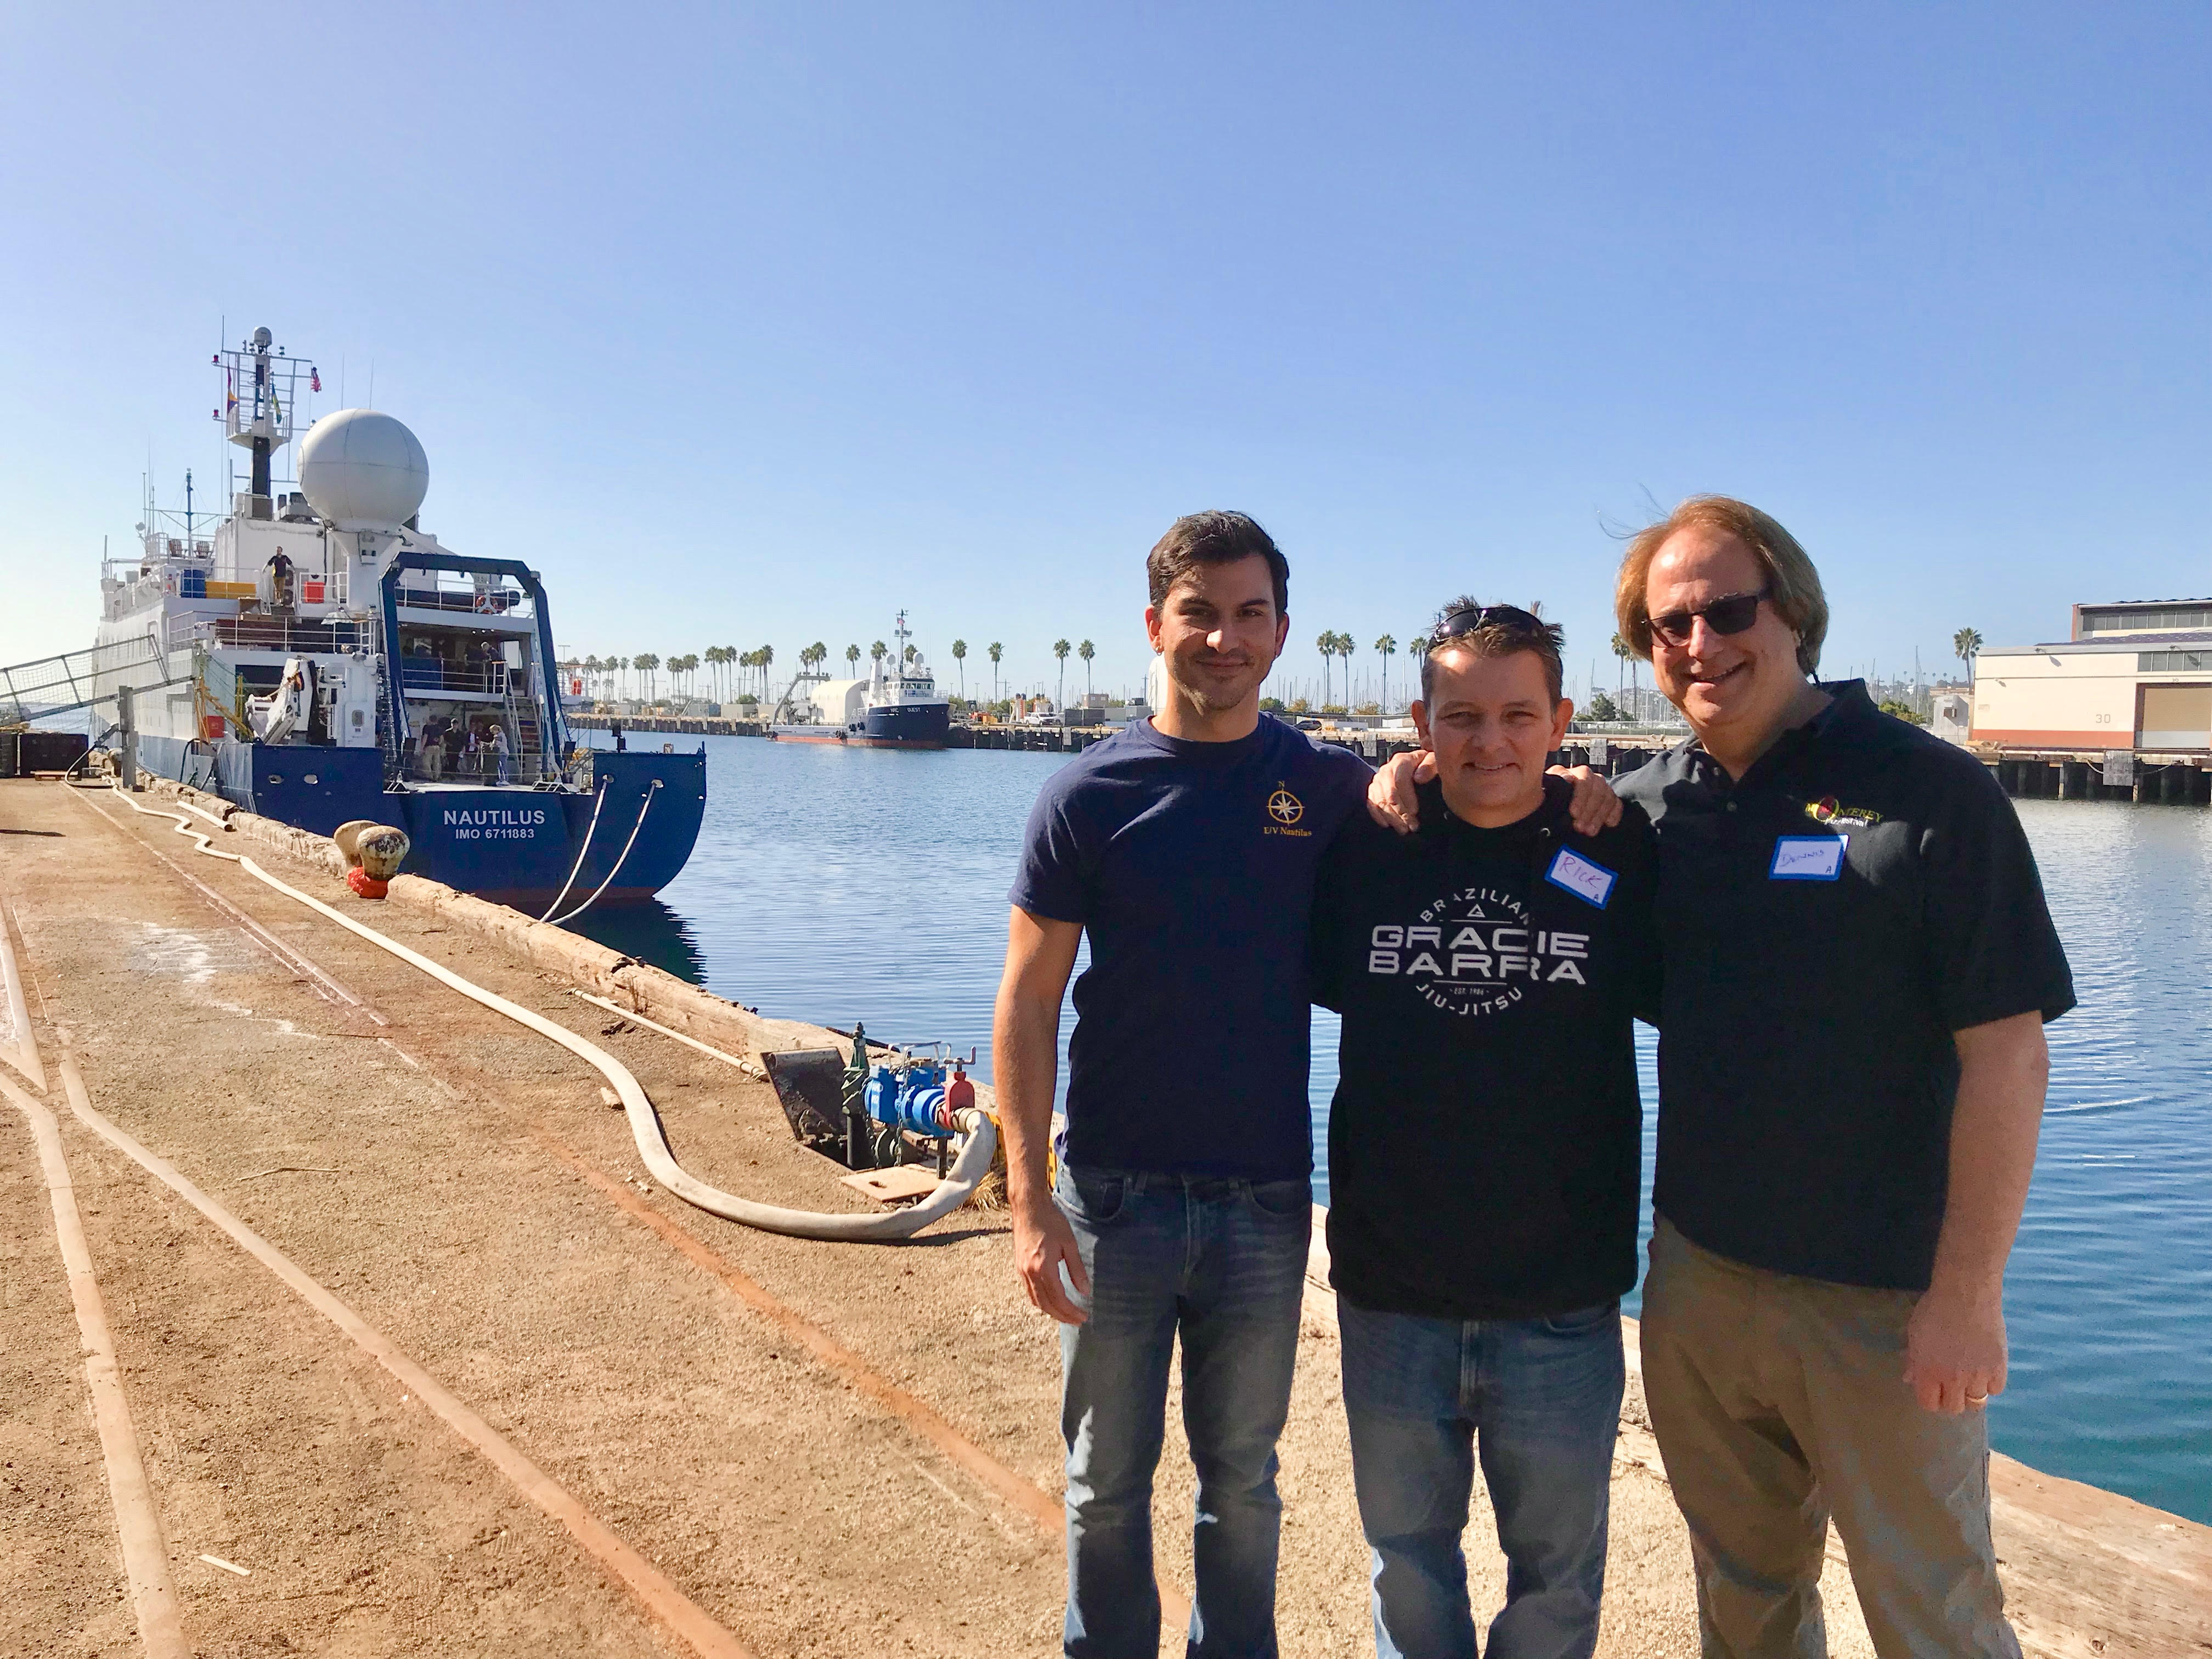 Rodriguez, Lee and Hagensmith stand on a concrete doc with a ship in the water behind them